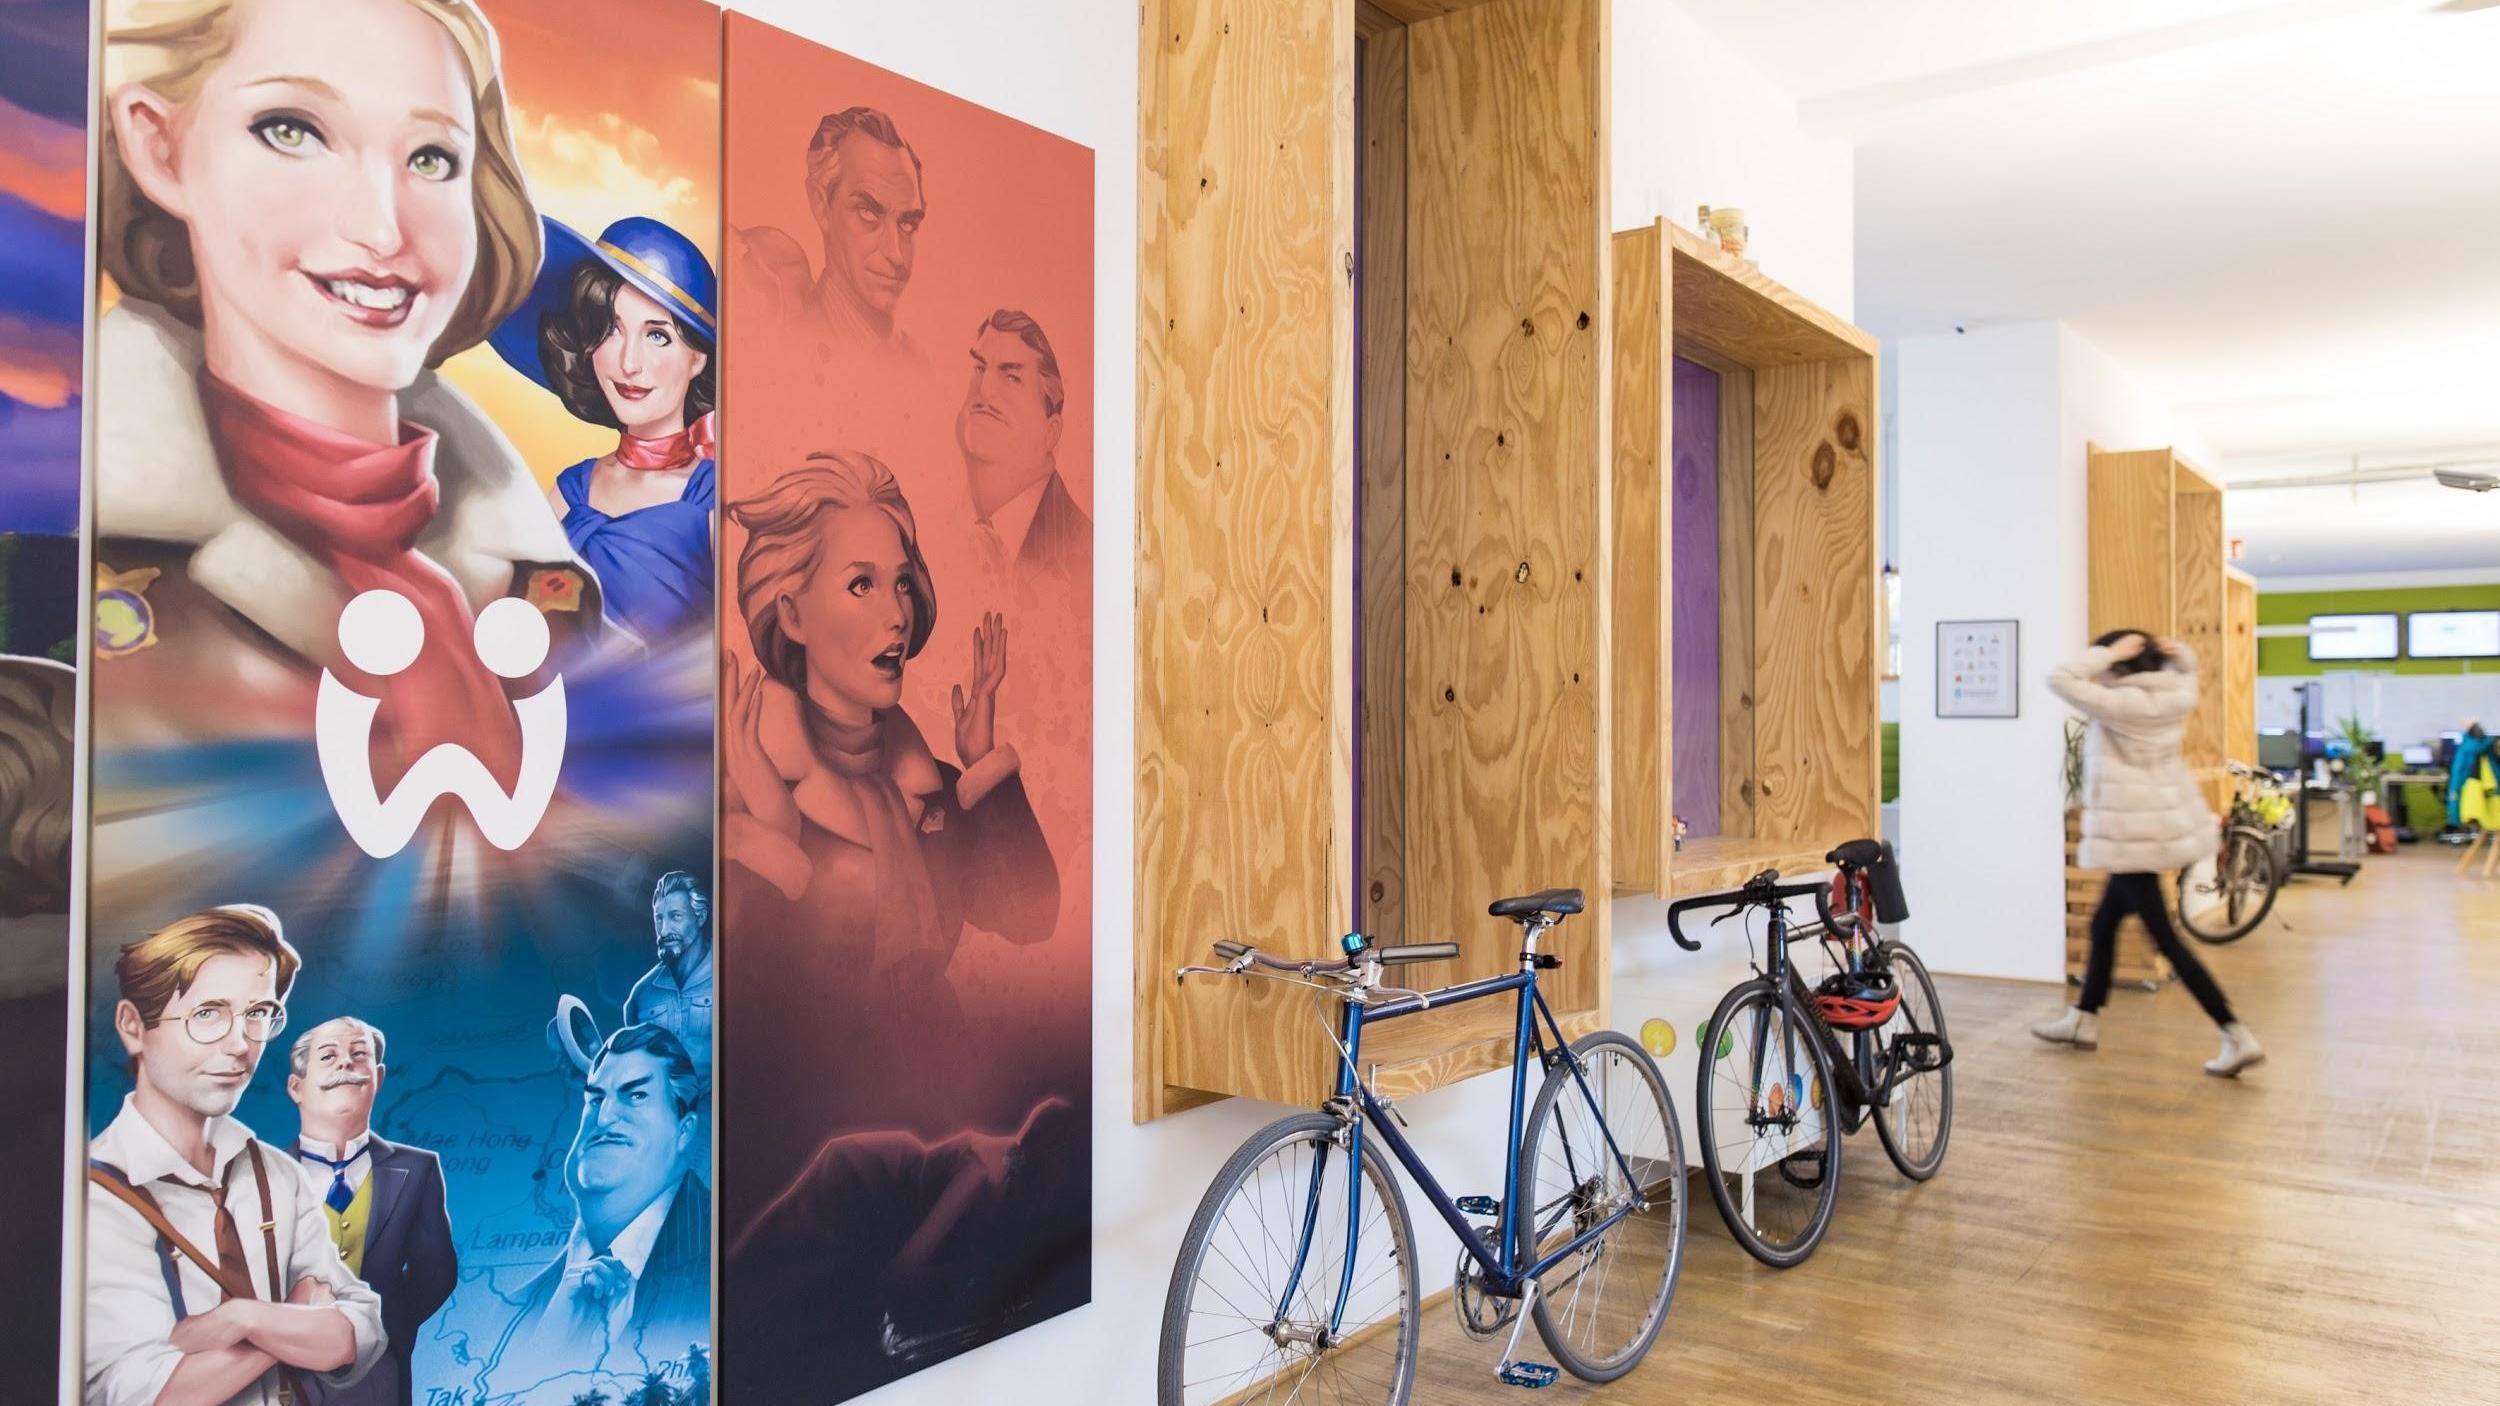 Hallway with large paintings of human faces and bicycles leaning against the wall